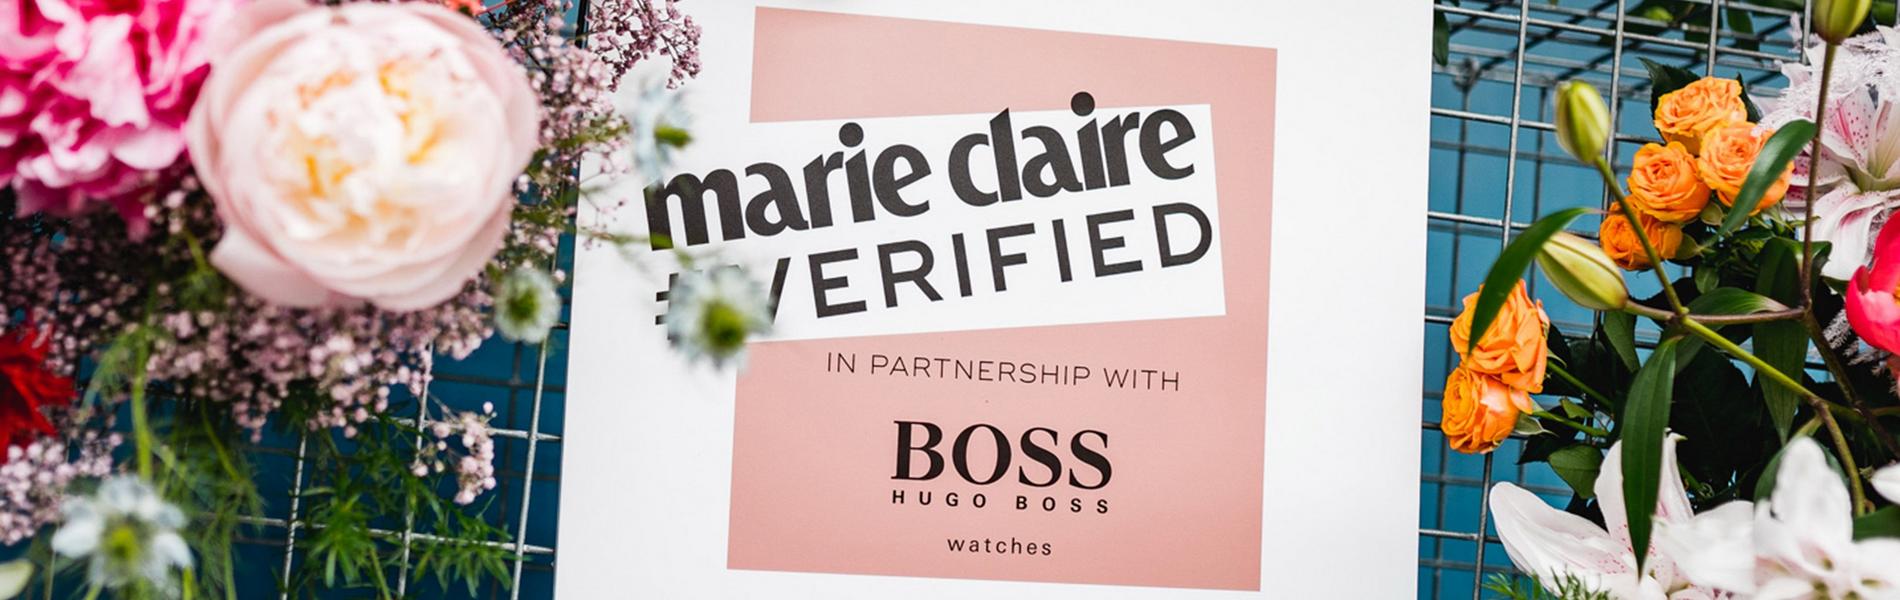 BOSS Watches Marie Claire Verified